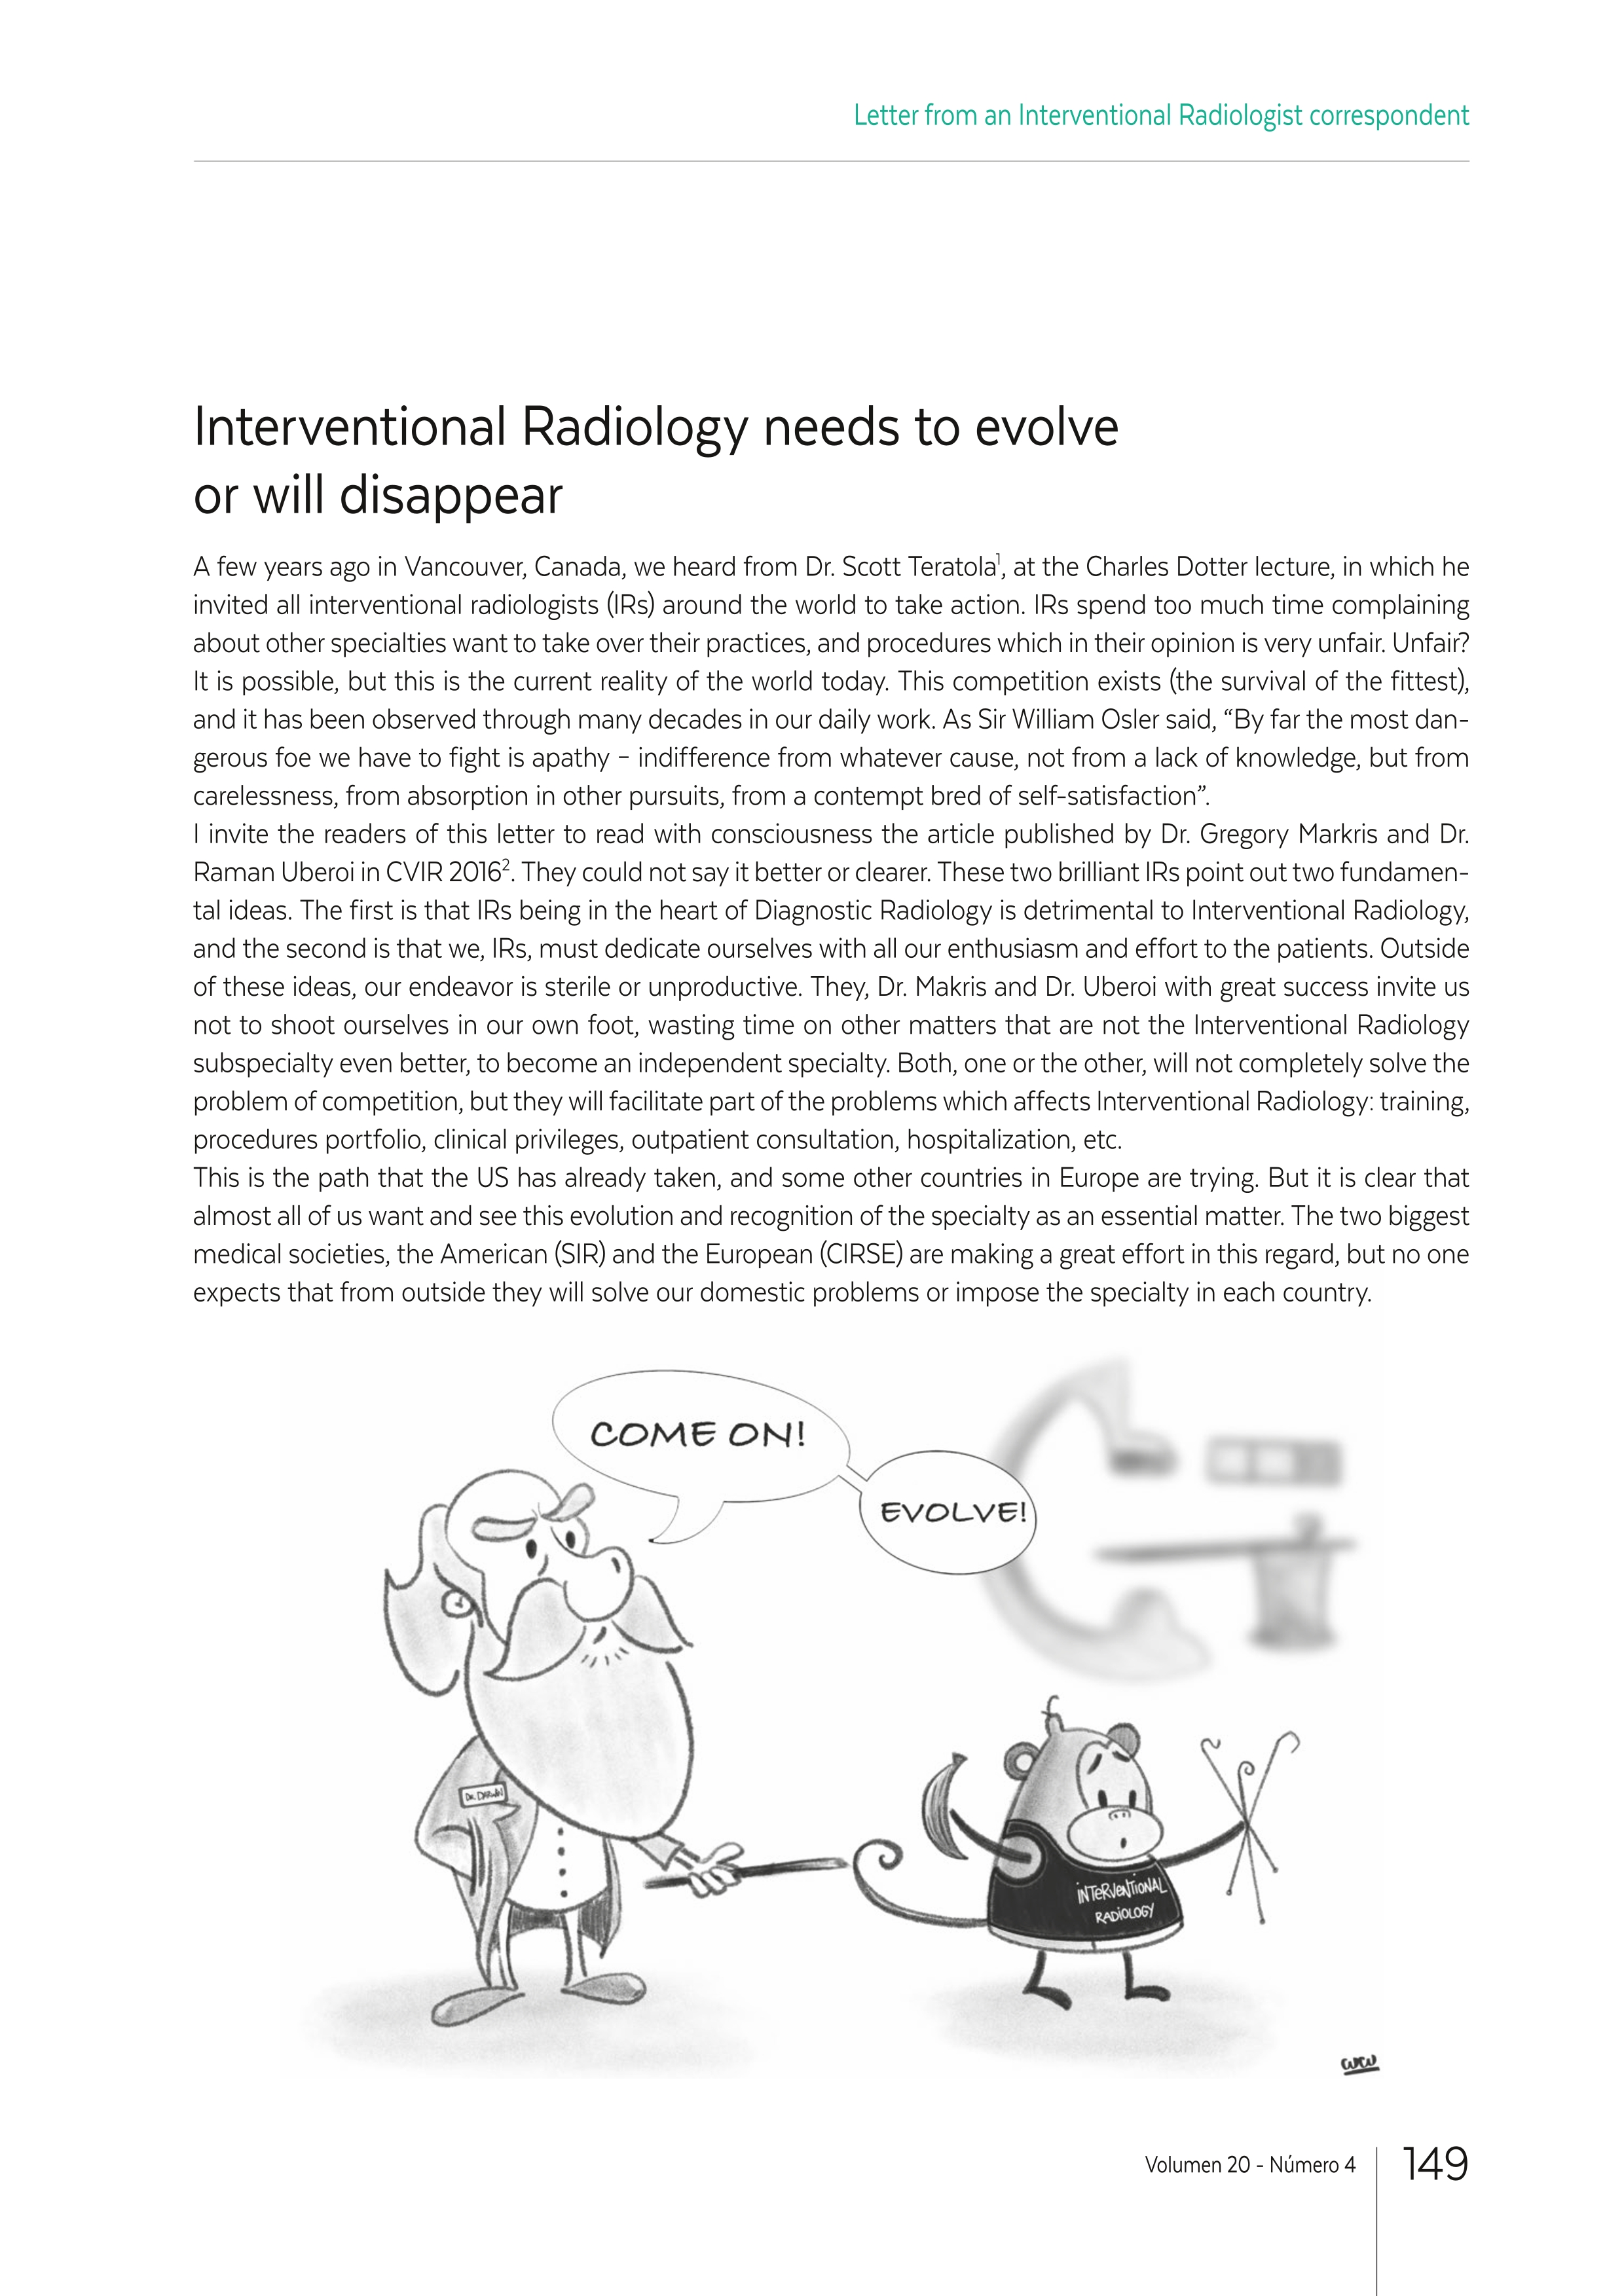 Interventional Radiology needs to evolve or will disappear